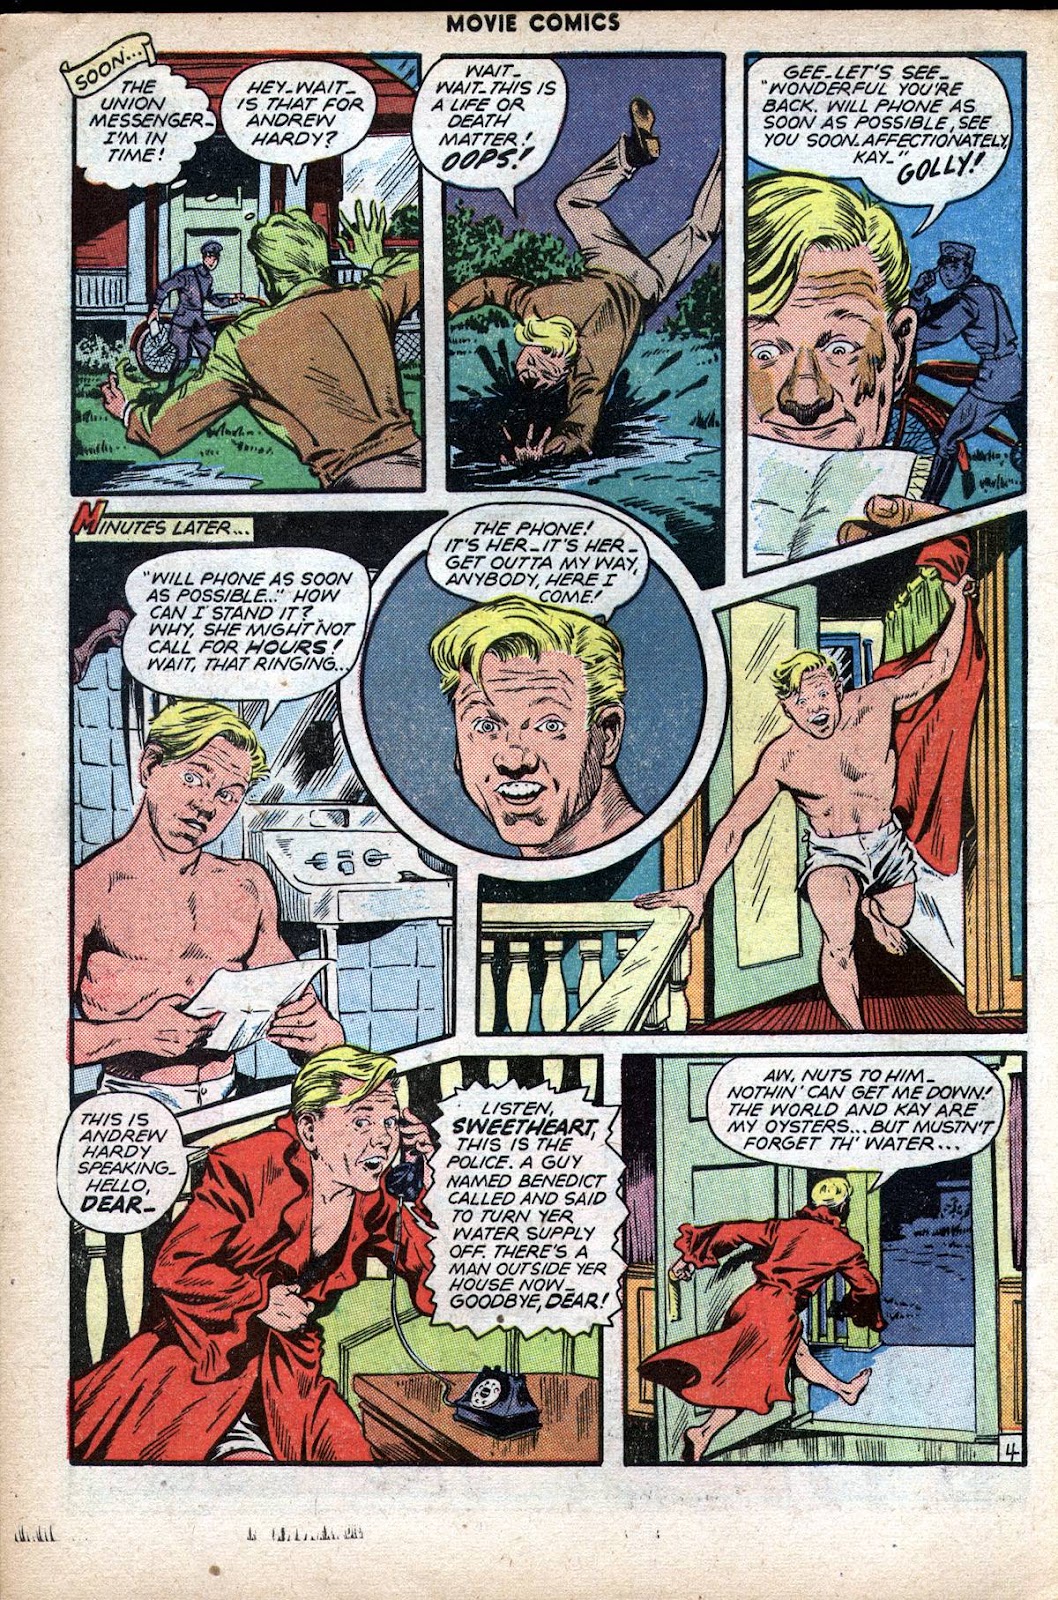 Movie Comics (1946) issue 3 - Page 6